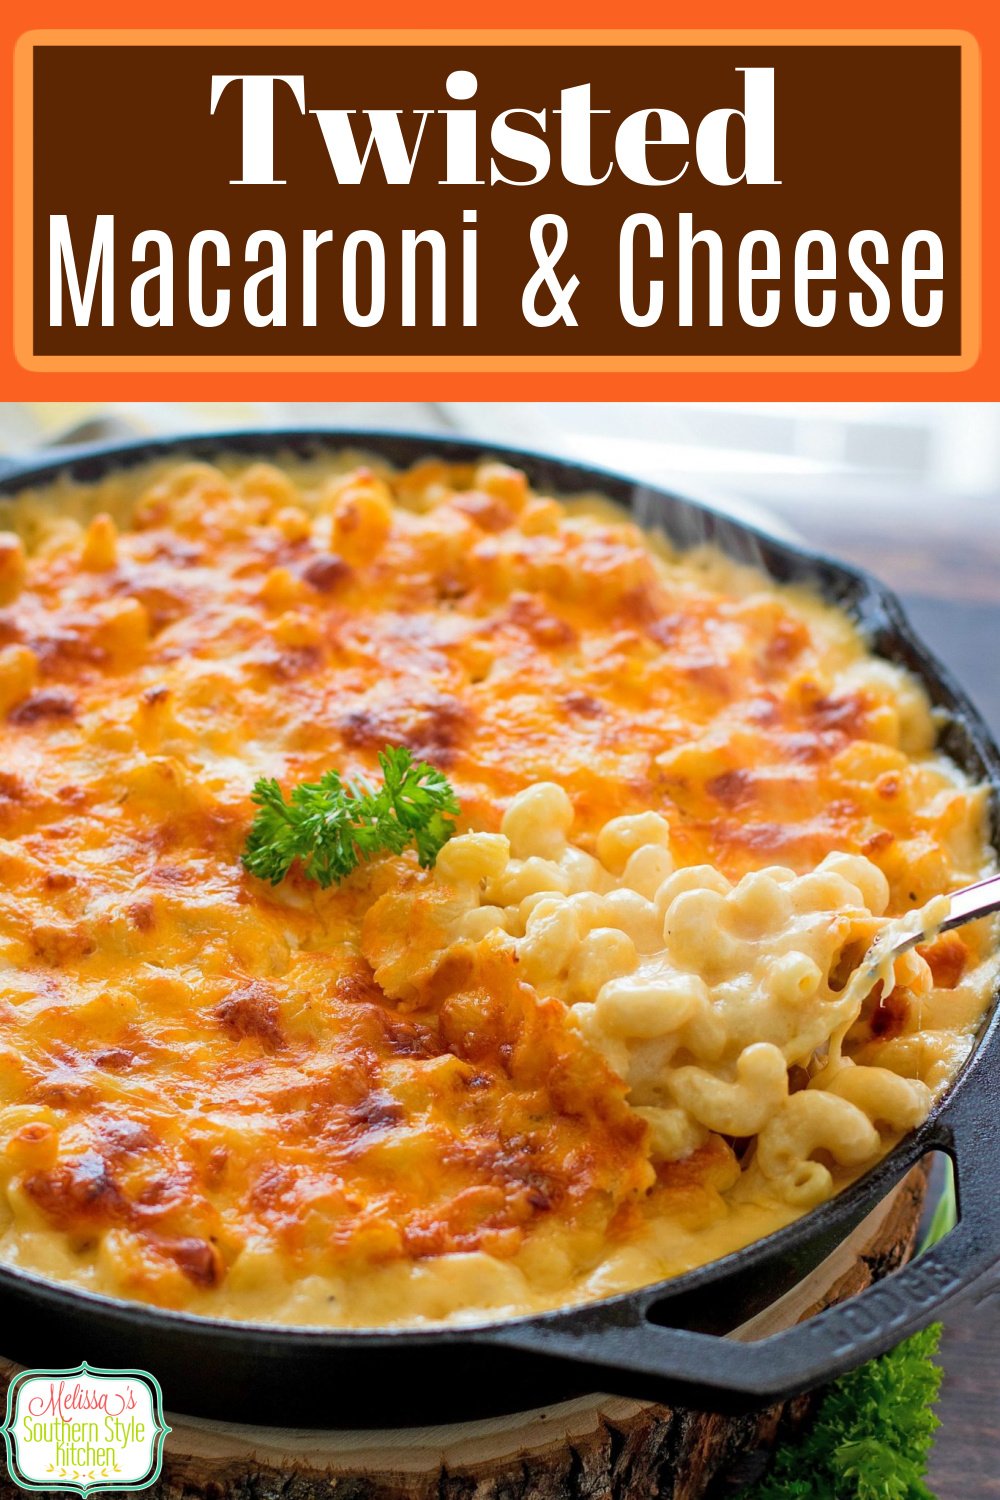 This made-from-scratch Twisted Macaroni and Cheese features a blend of three varieties of cheese making it an ooey gooey extravaganza #macaroniandcheese #twistedmacaroniandcheese #twistedmacaroni #macaroniandcheeserecipes #twistedmacandcheese #sidedishrecipes #pasta #sidedishrecipes #southernfood #southernrecipes #holidayrecipes #dinner #dinnerideas via @melissasssk